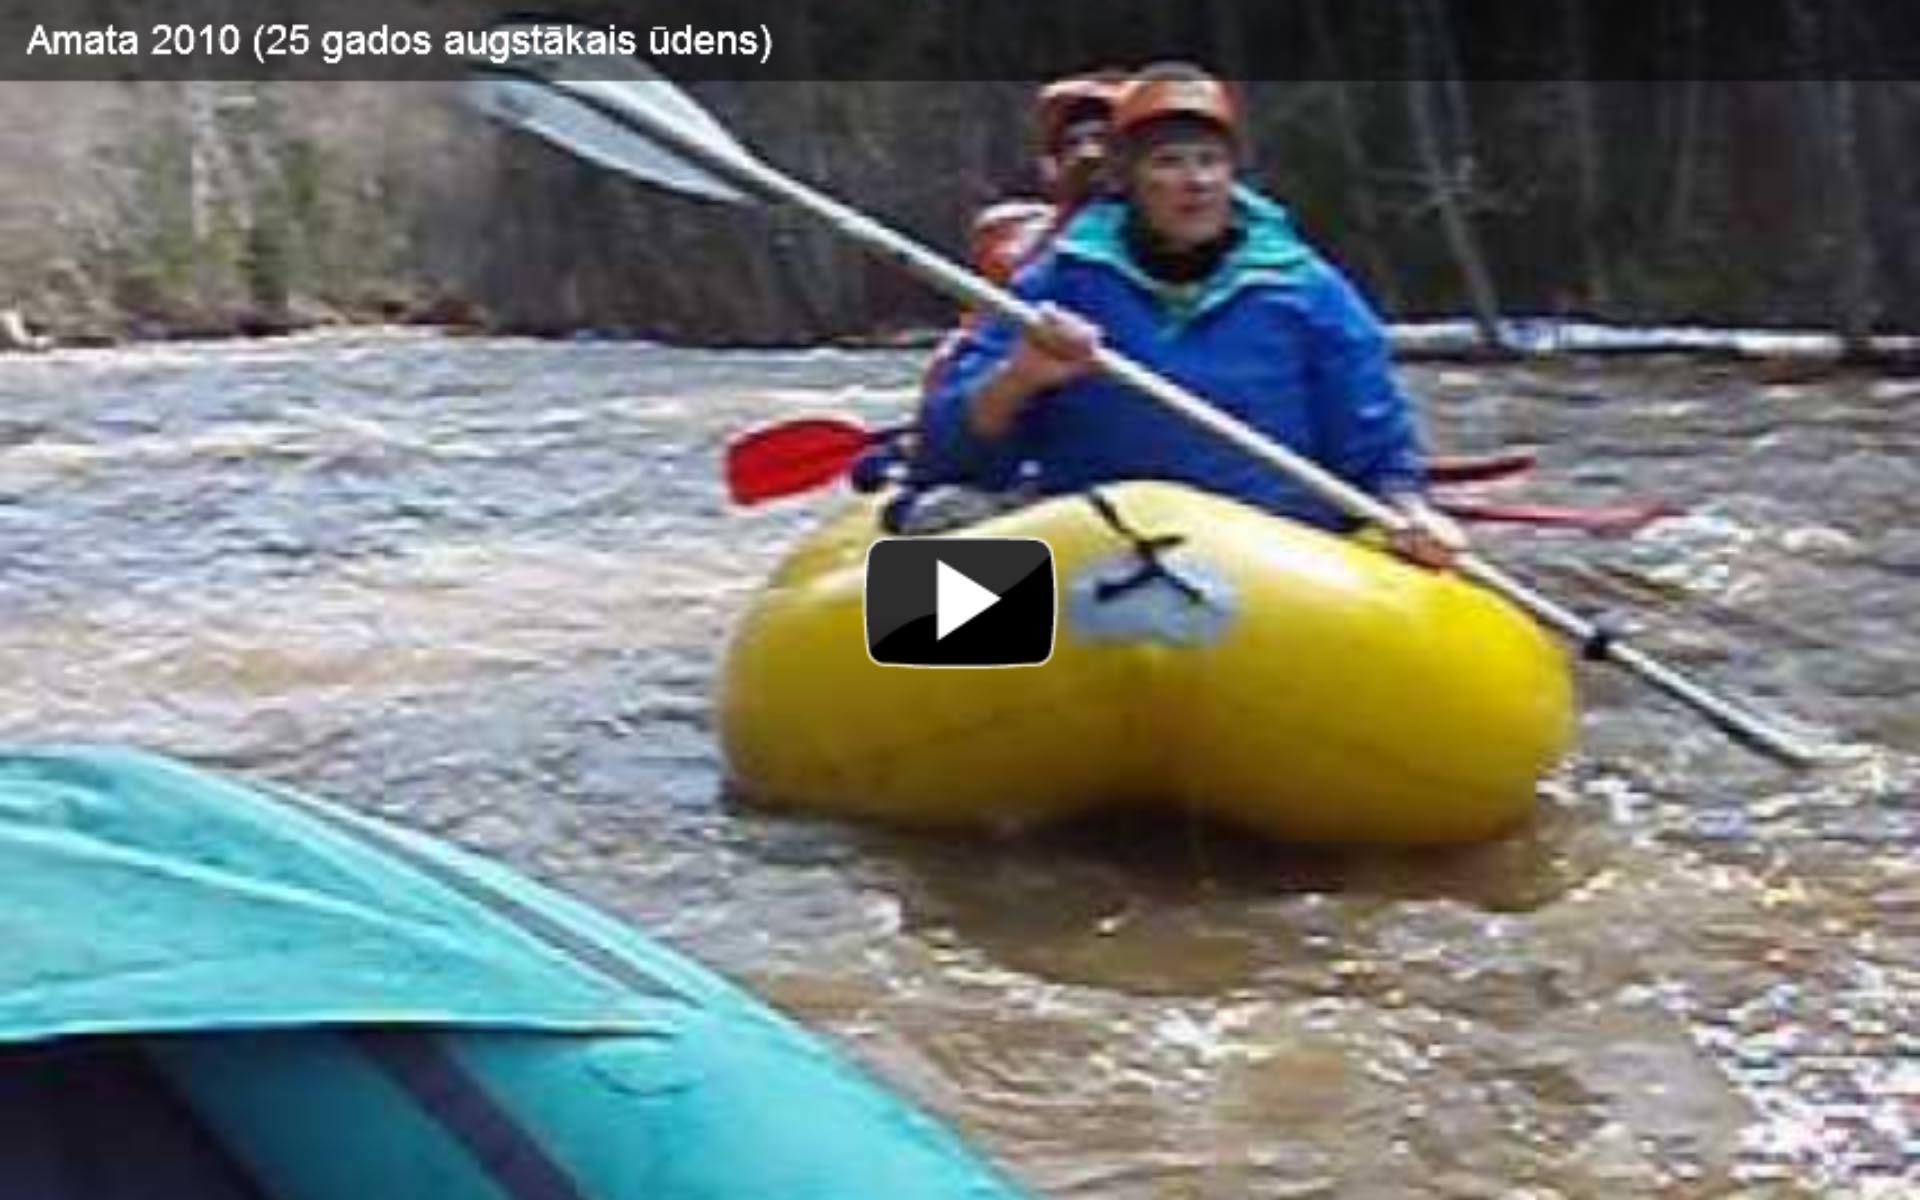 Amata rafting – highest water level in 25 years – MOVIE